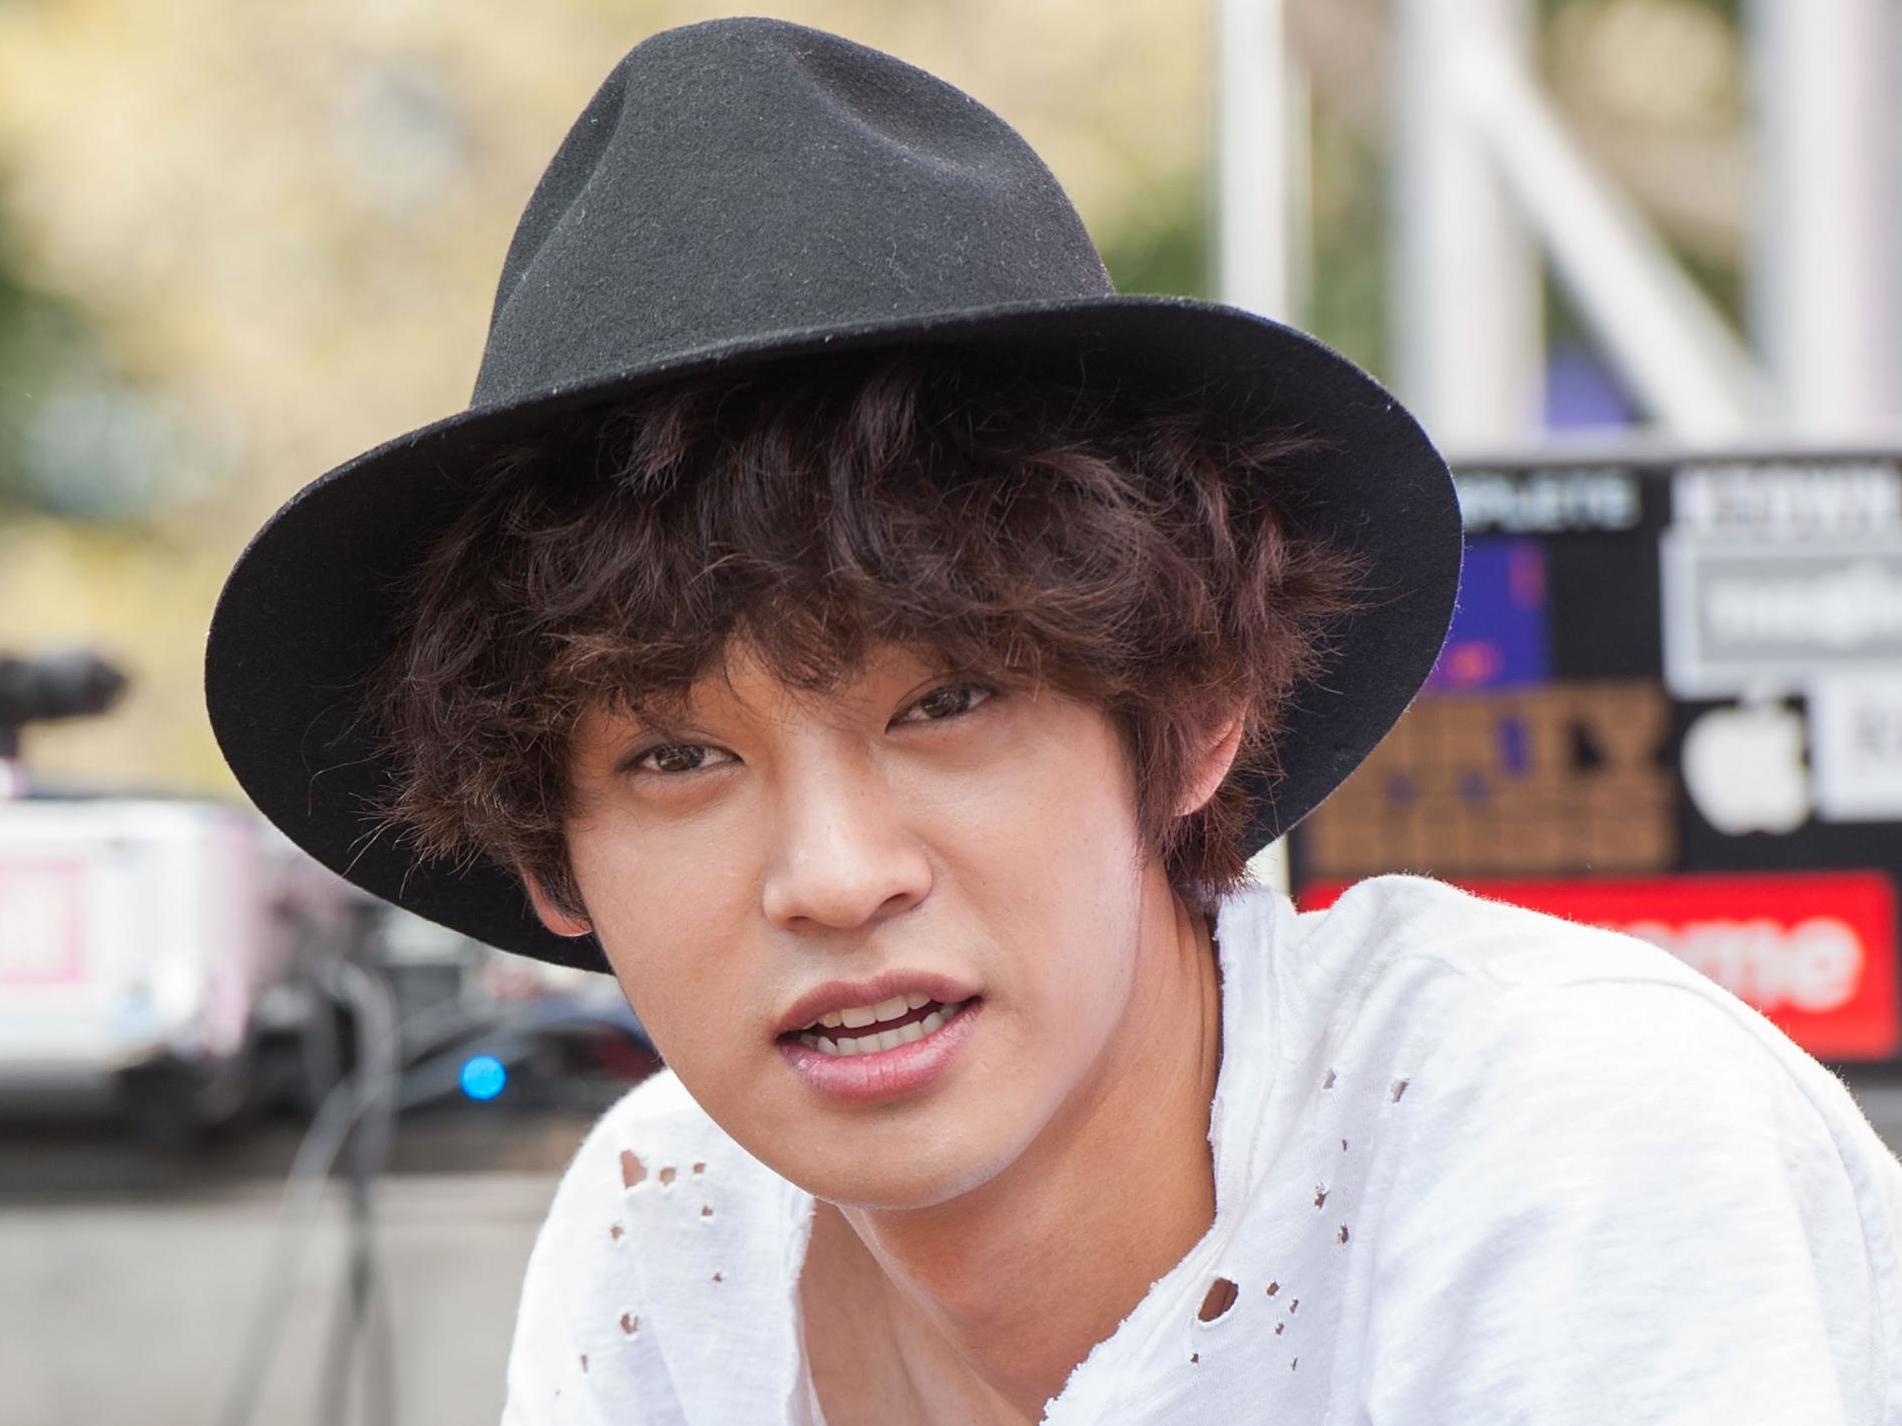 Jung Joon-Young says he will cooperate with Seoul police as they investigate a growing sex scandal for the K-pop industry